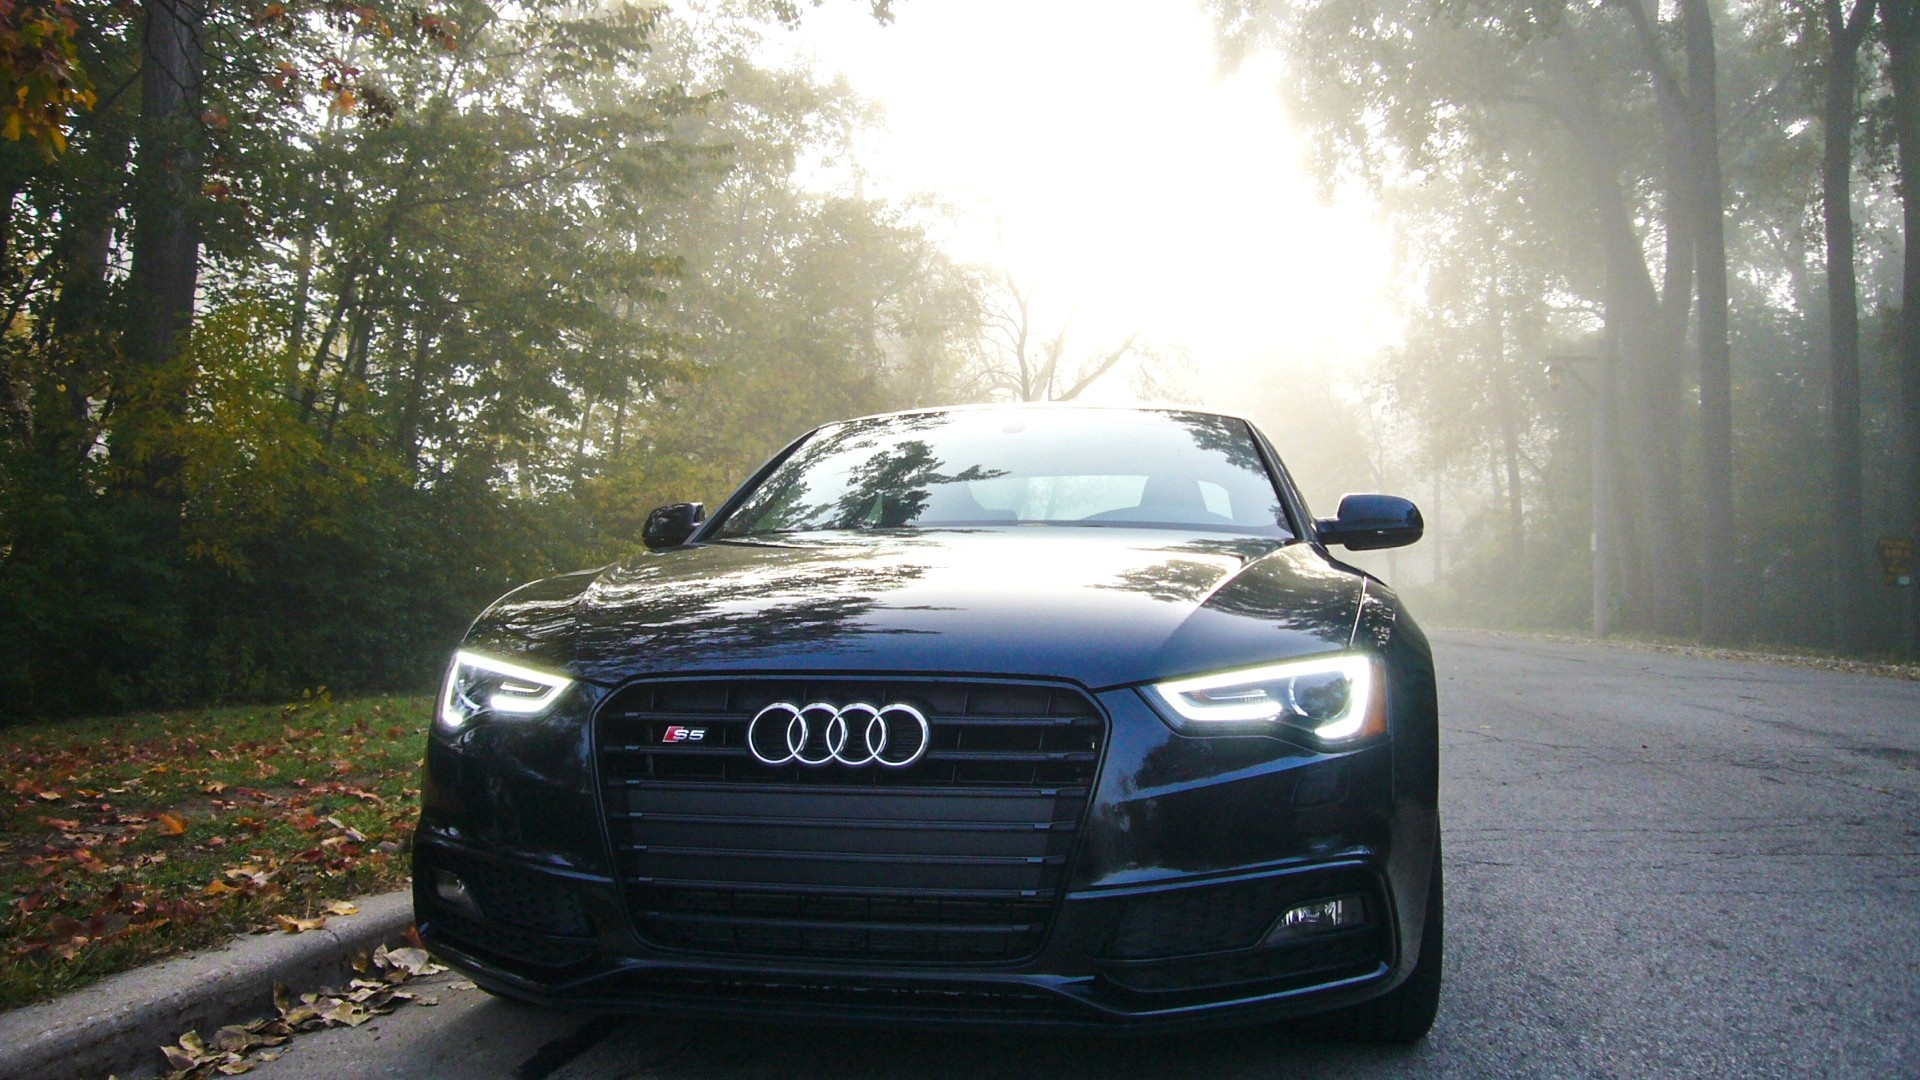 Audi S5, Free download, High-quality wallpapers, Best S5 wallpapers, 1920x1080 Full HD Desktop